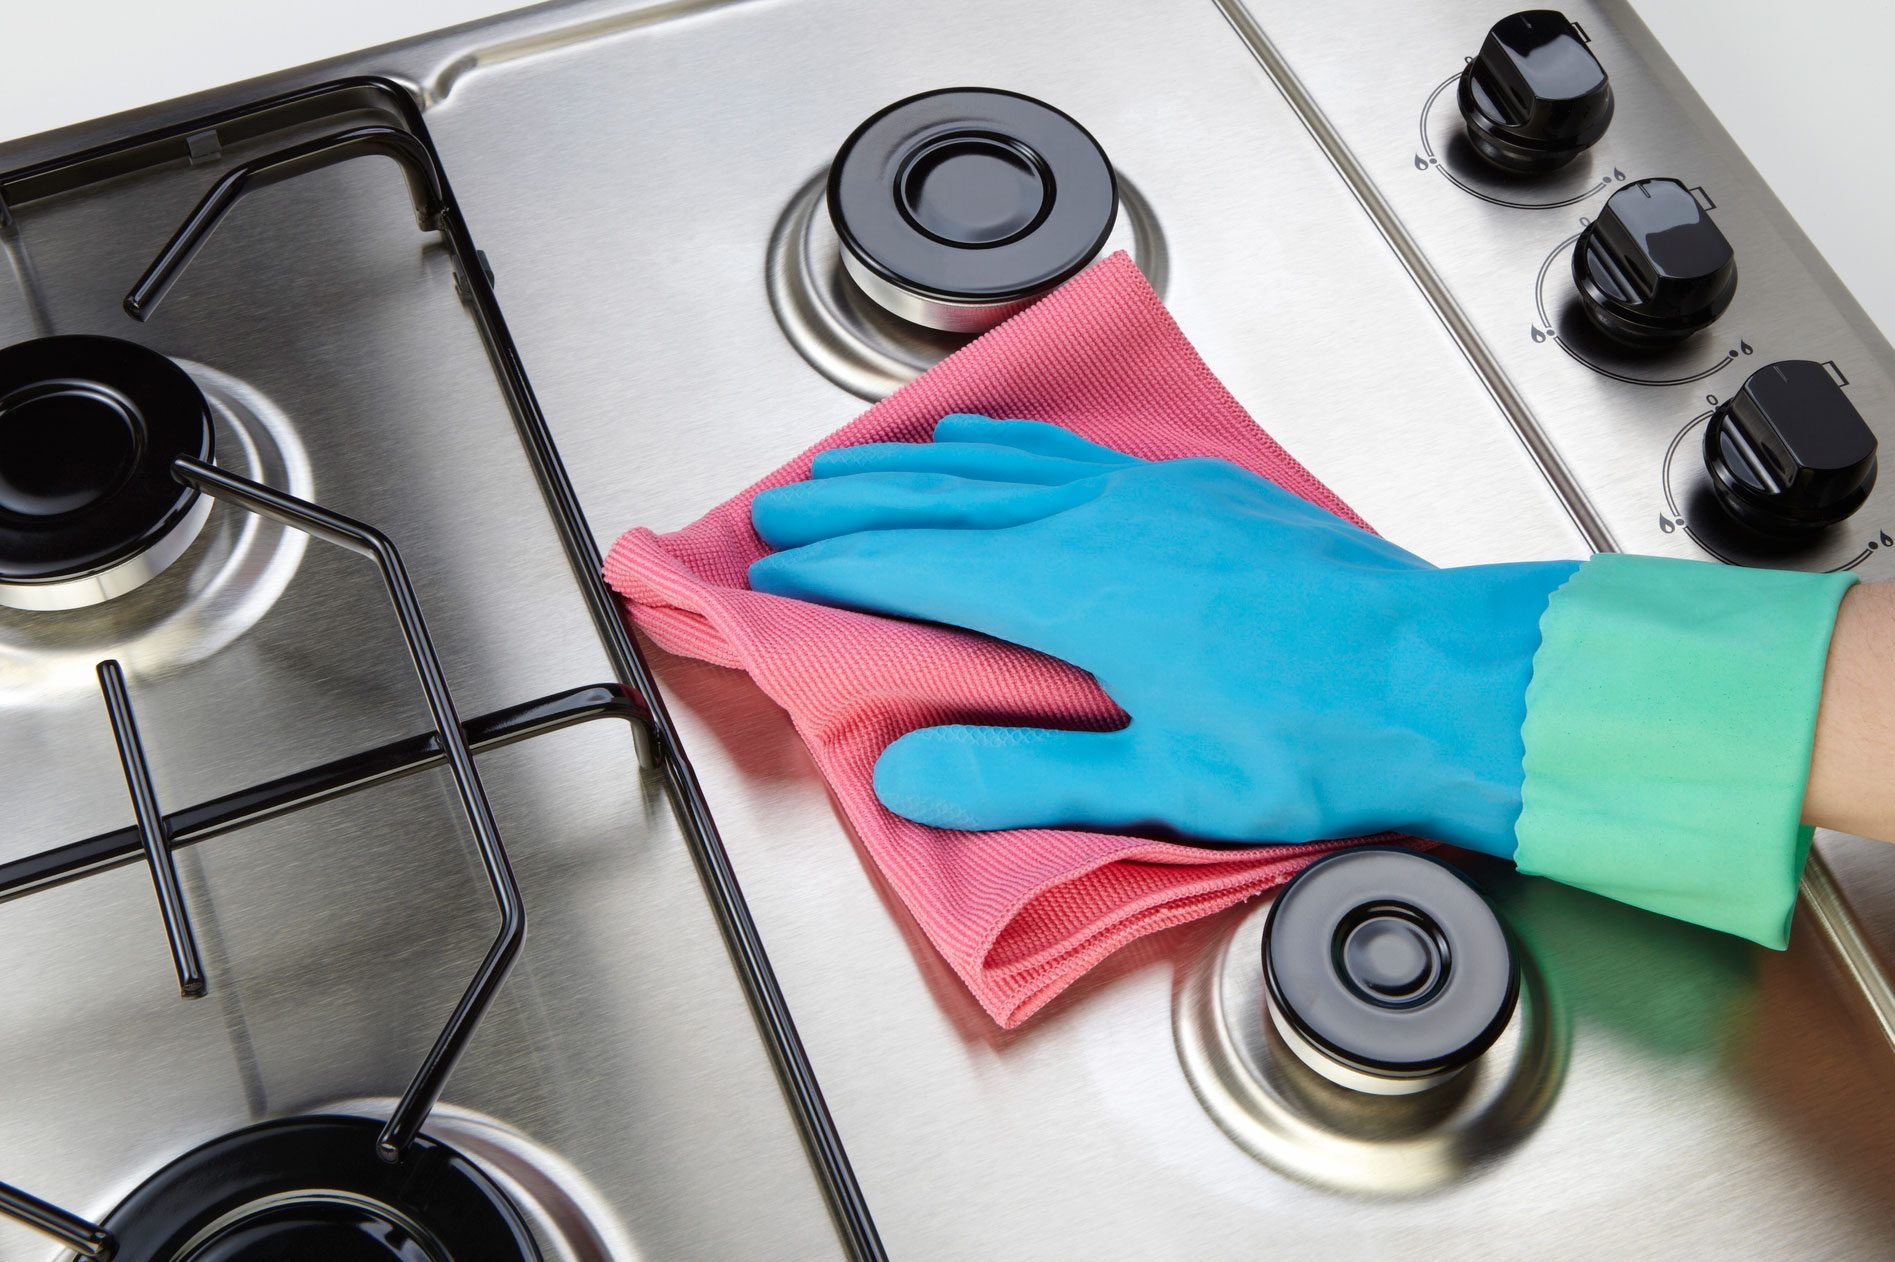 How to Clean Stainless Steel Without Chemicals